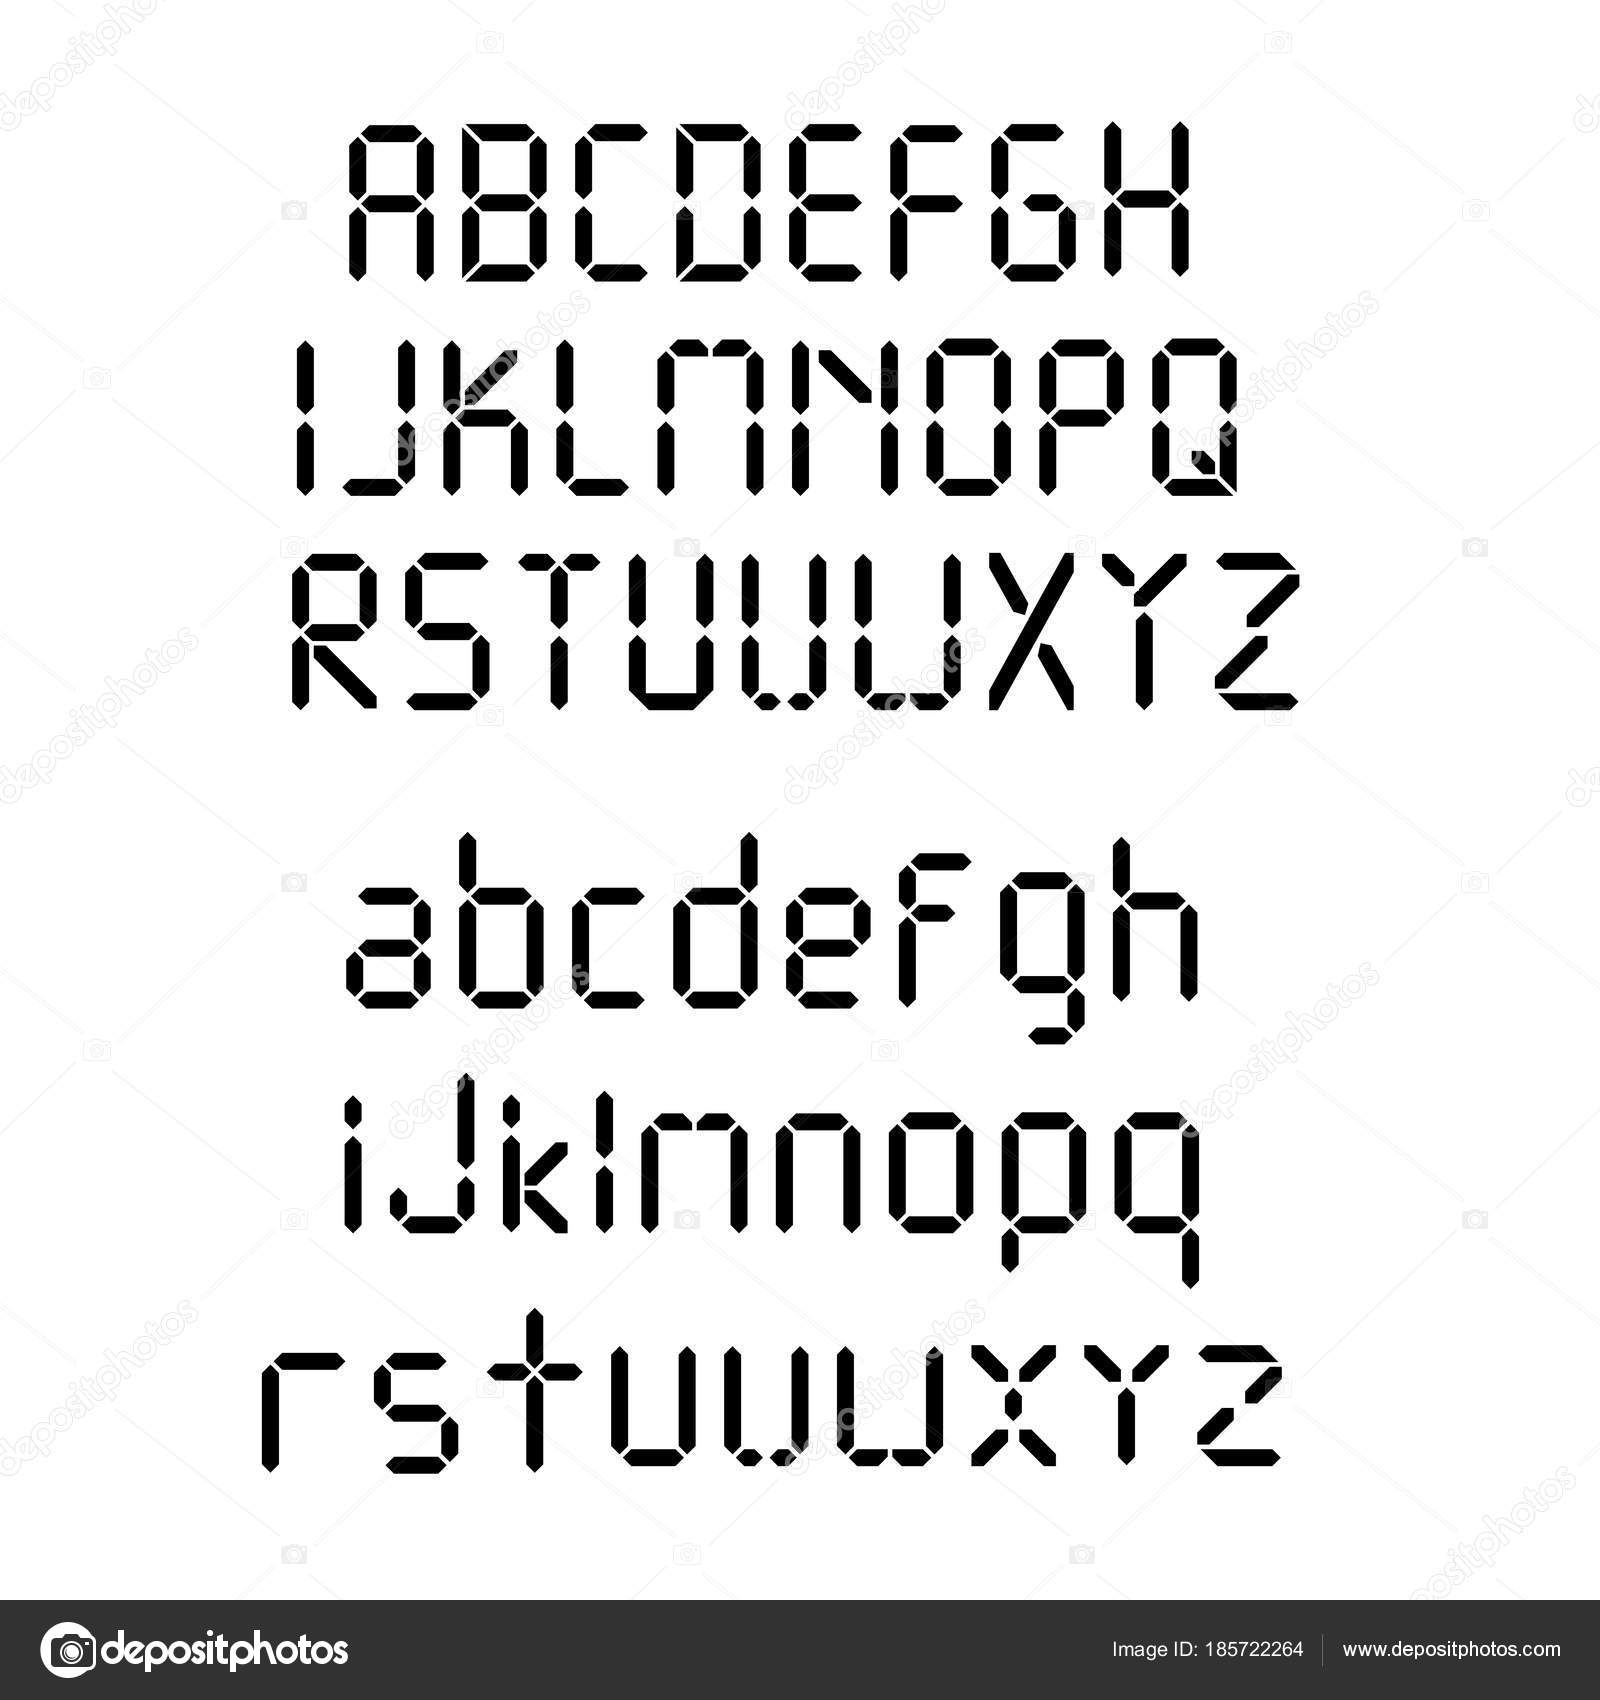 Digital font. Alarm clock letters. Numbers and letters set for a digital watch and other ...